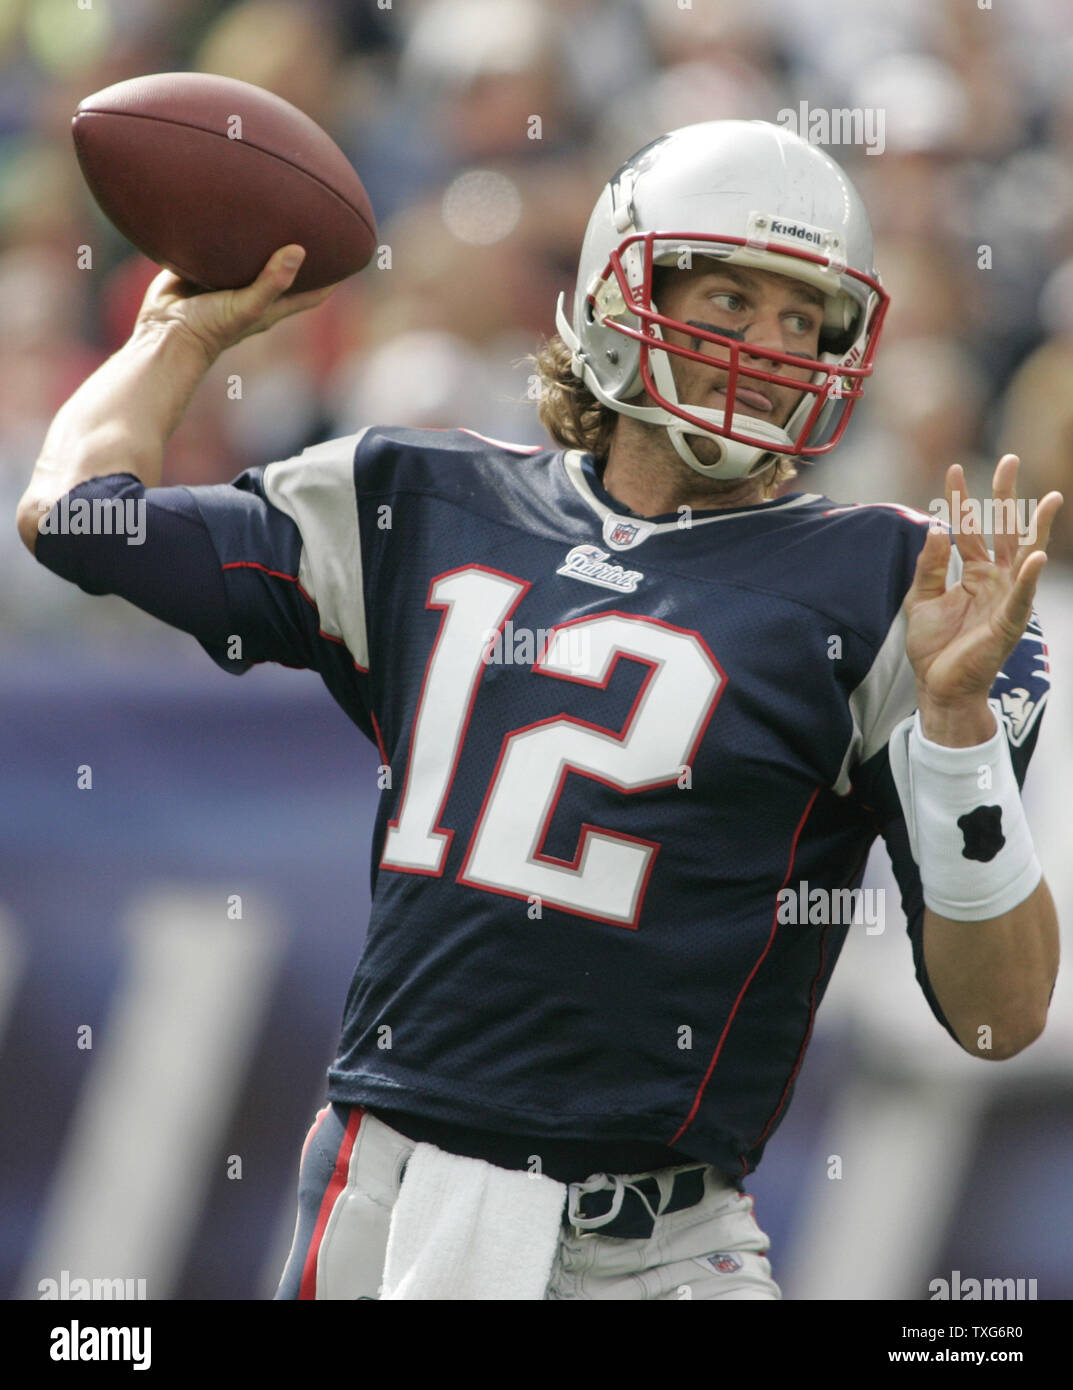 New England Patriots QB Tom Brady throws a pass in the first quarter against the Buffalo Bills at Gillette Stadium in Foxboro, Massachusetts on September 26, 2010.      UPI/Matthew Healey Stock Photo